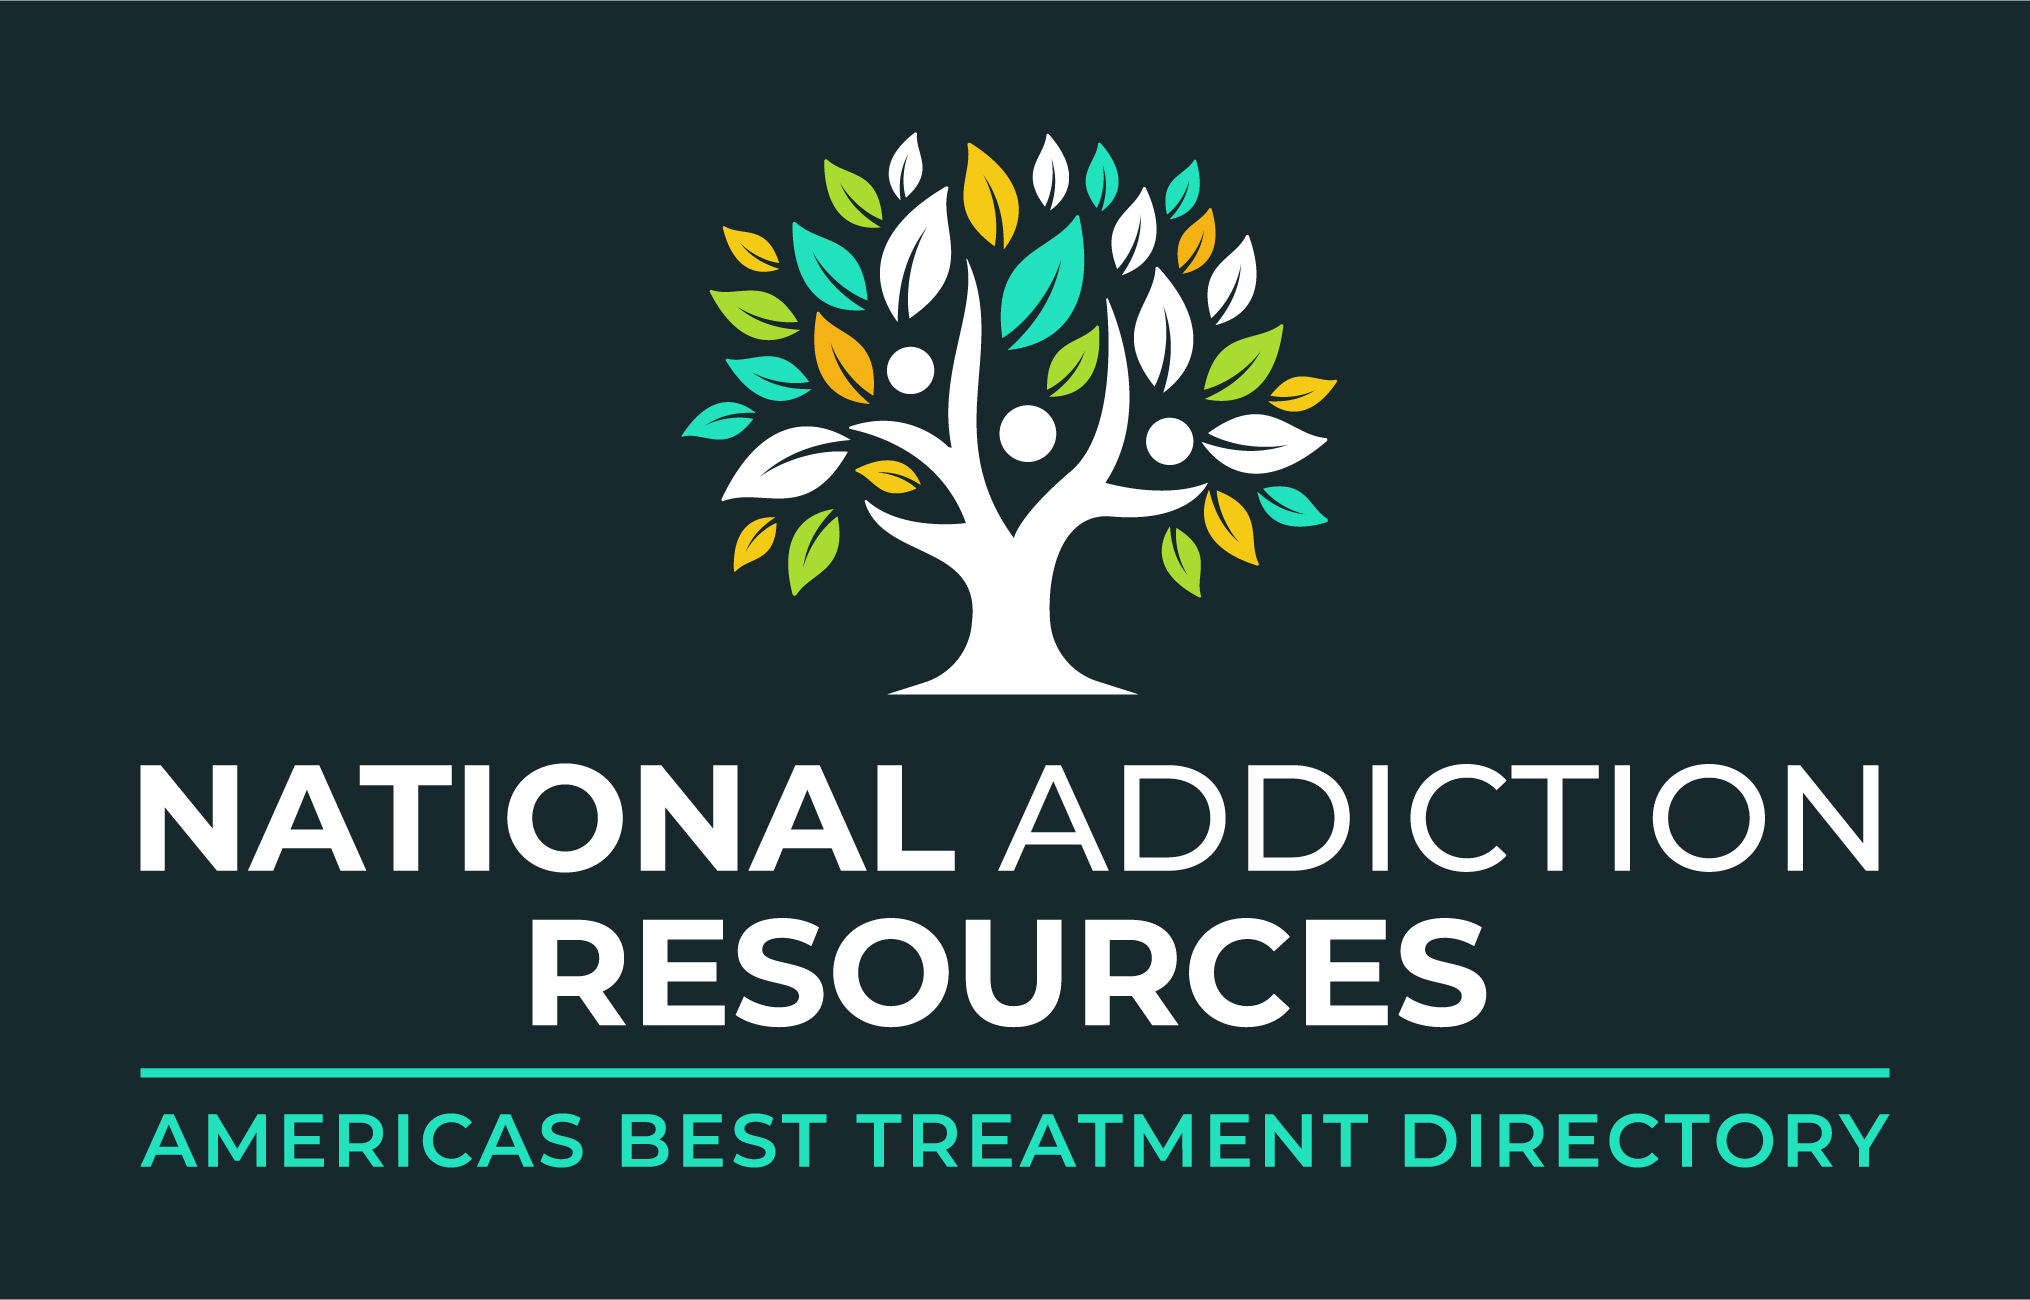 National Addiction Resources 01